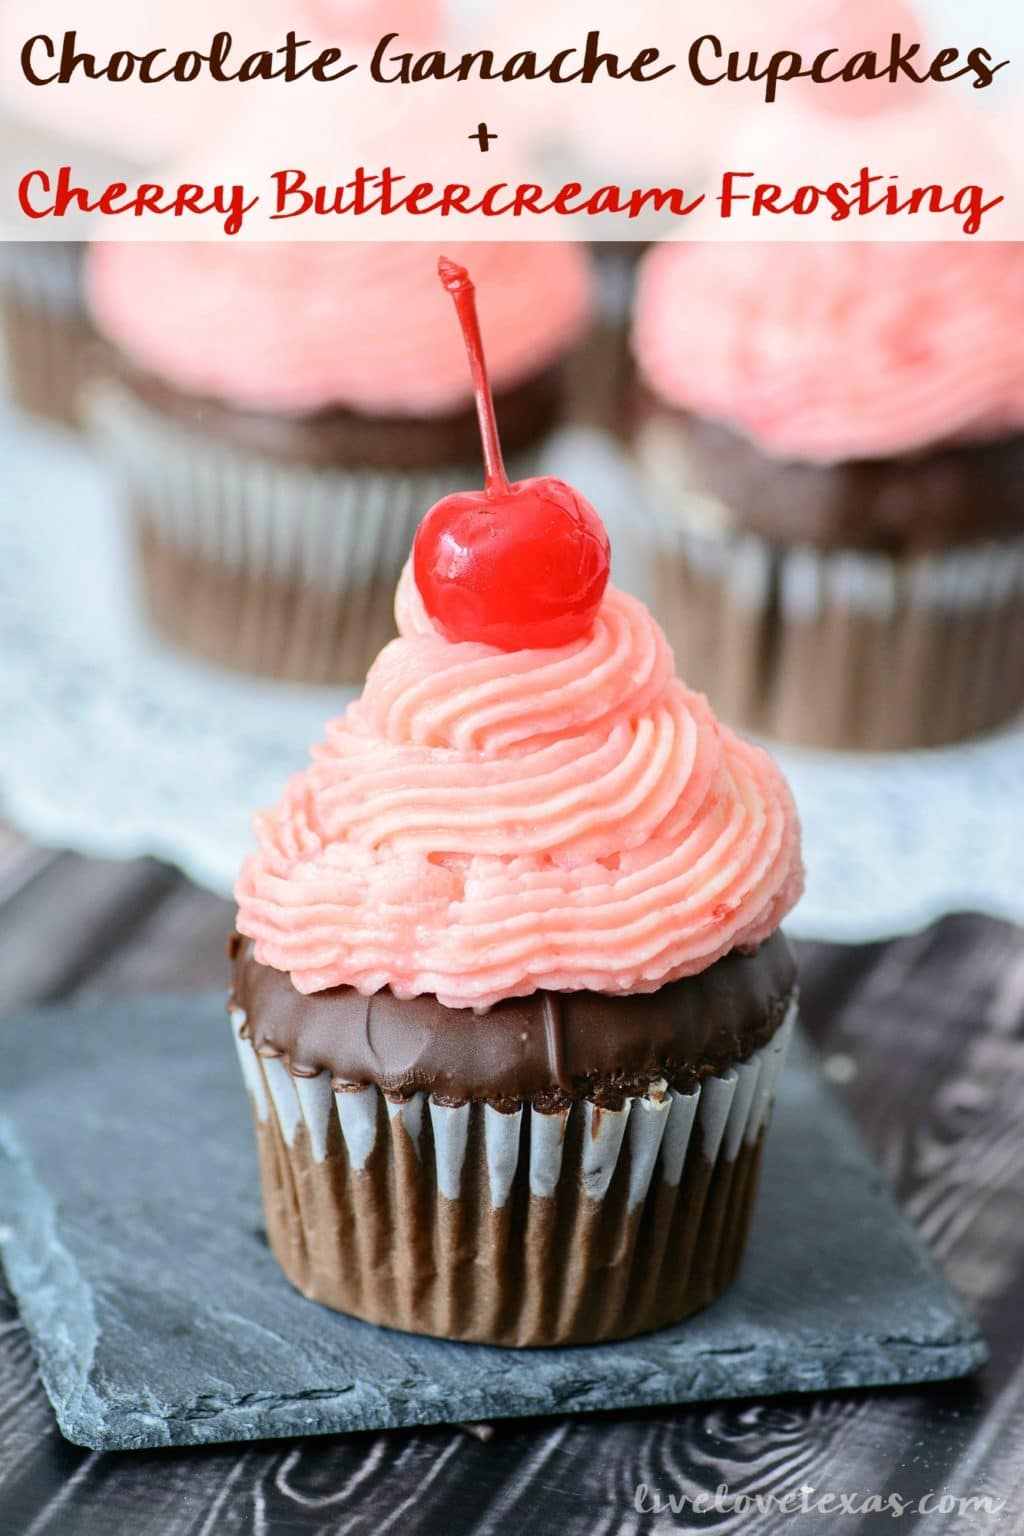 I know what I’m making on Valentine’s Day. These drool worthy Chocolate Ganache Cupcakes Recipe with Cherry Buttercream Frosting! Check out this ganache shortcut - you’ll love it! 